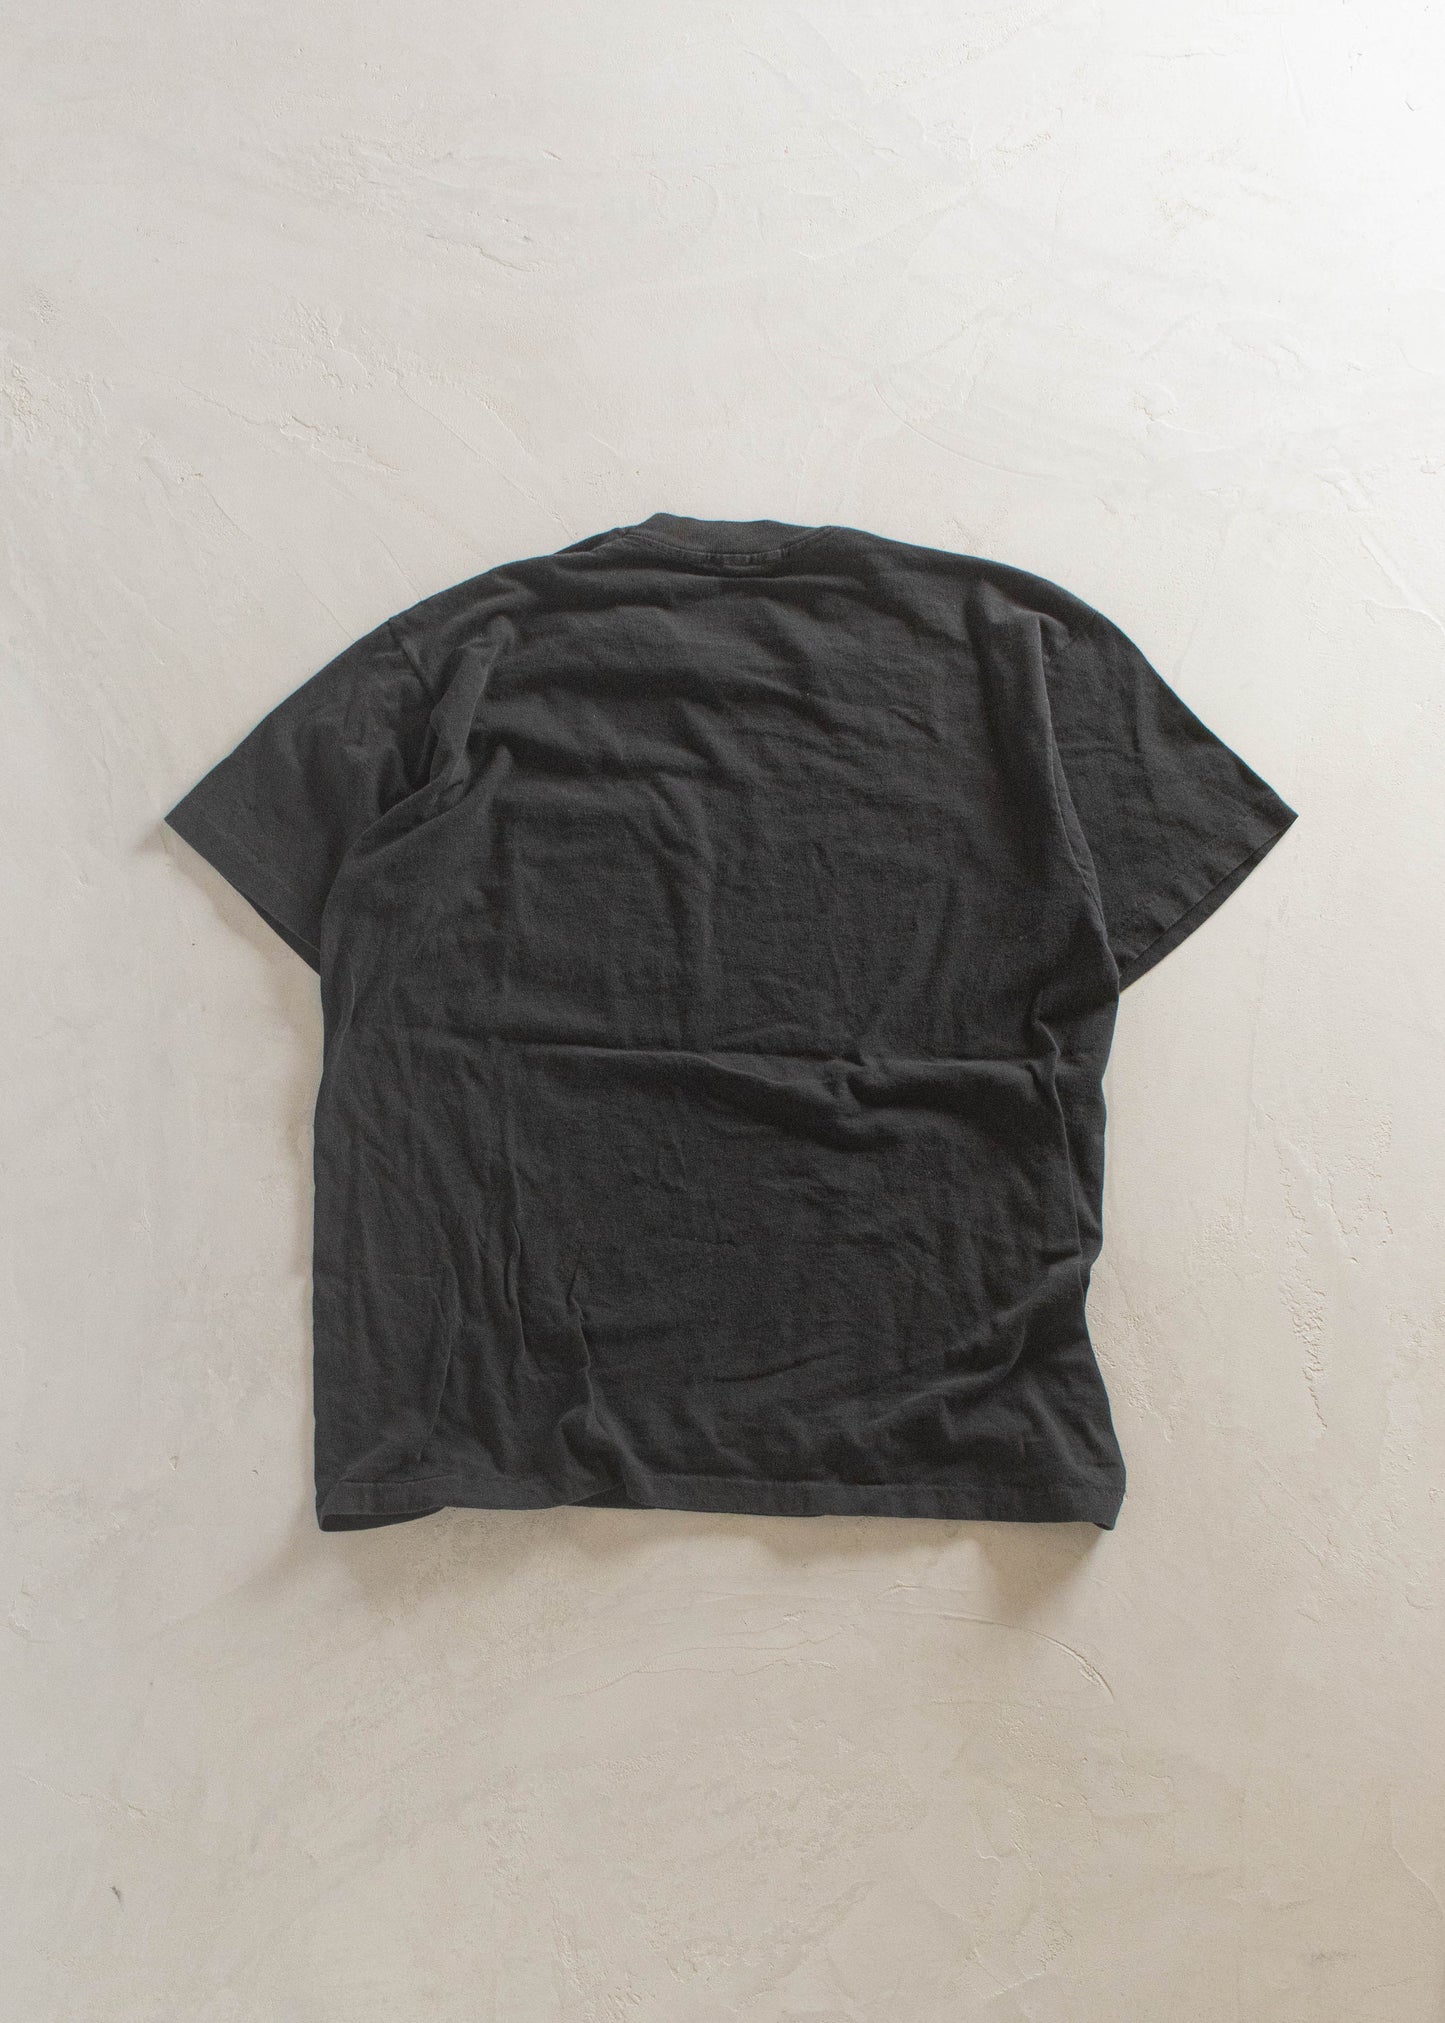 1980s Fruit of the Loom Selvedge Pocket T-Shirt Size L/XL